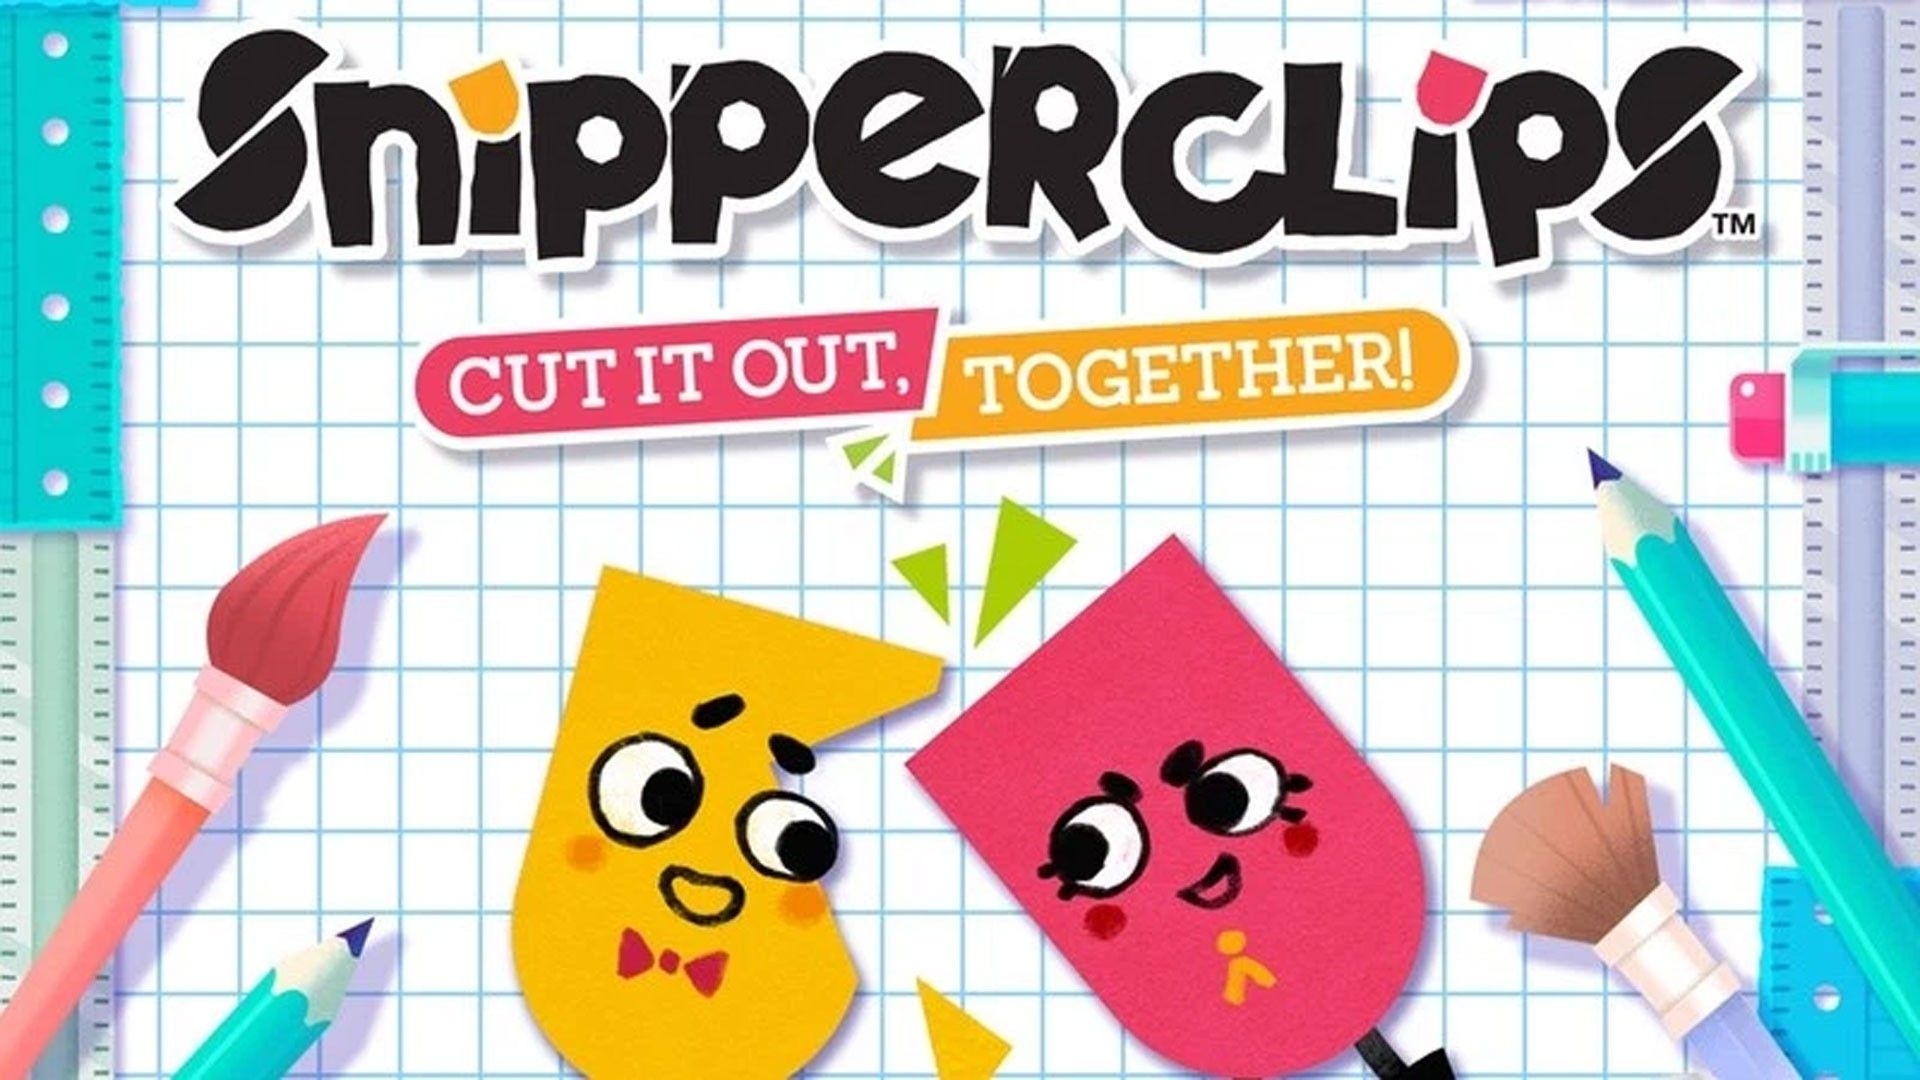 how much does snipperclips cost